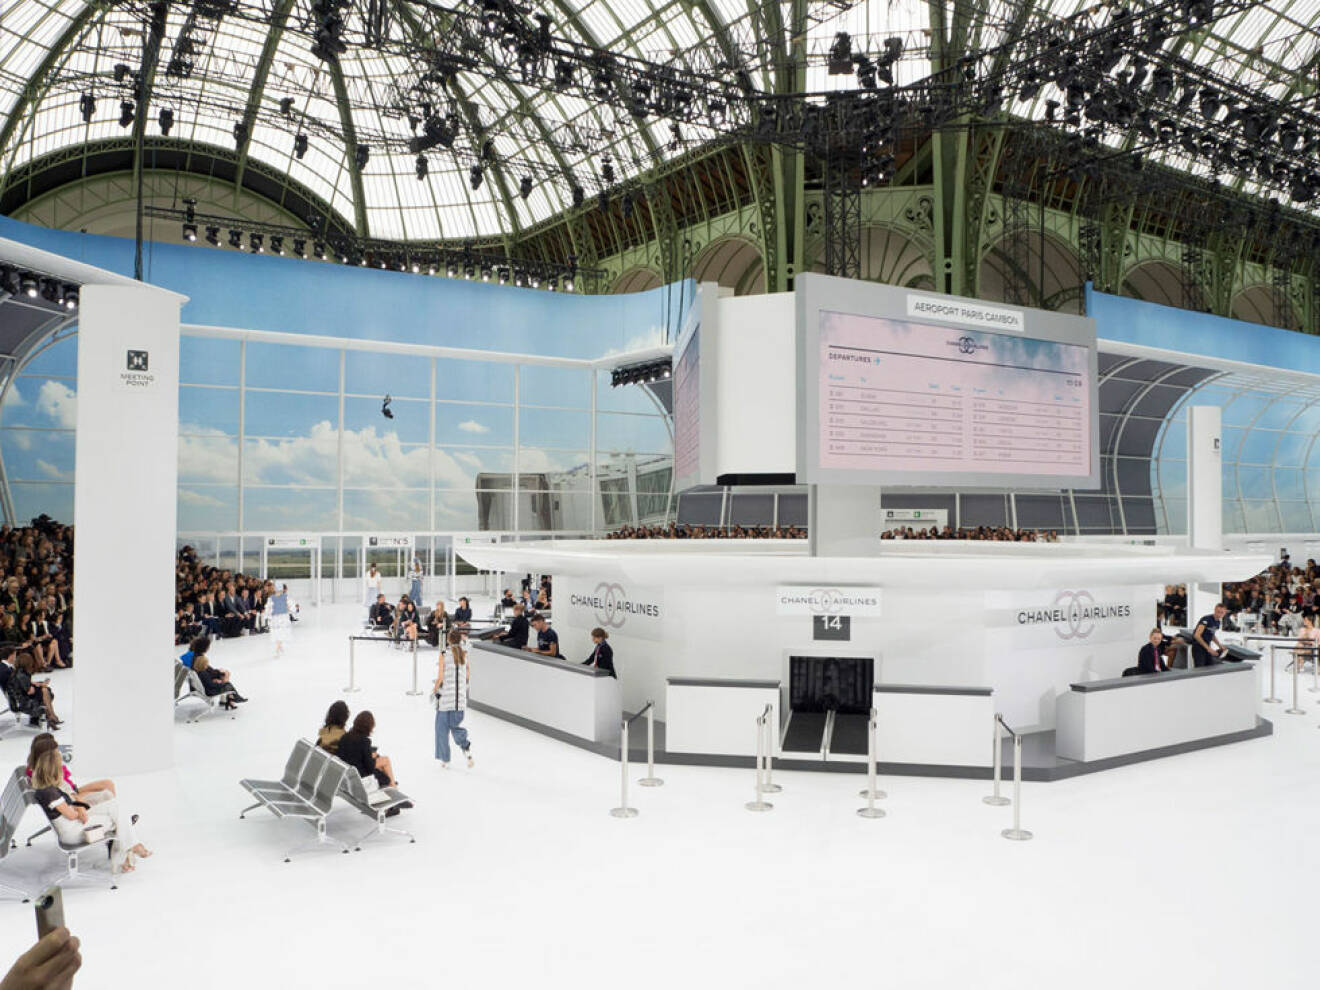 Chanel ss 16 airline setdesign